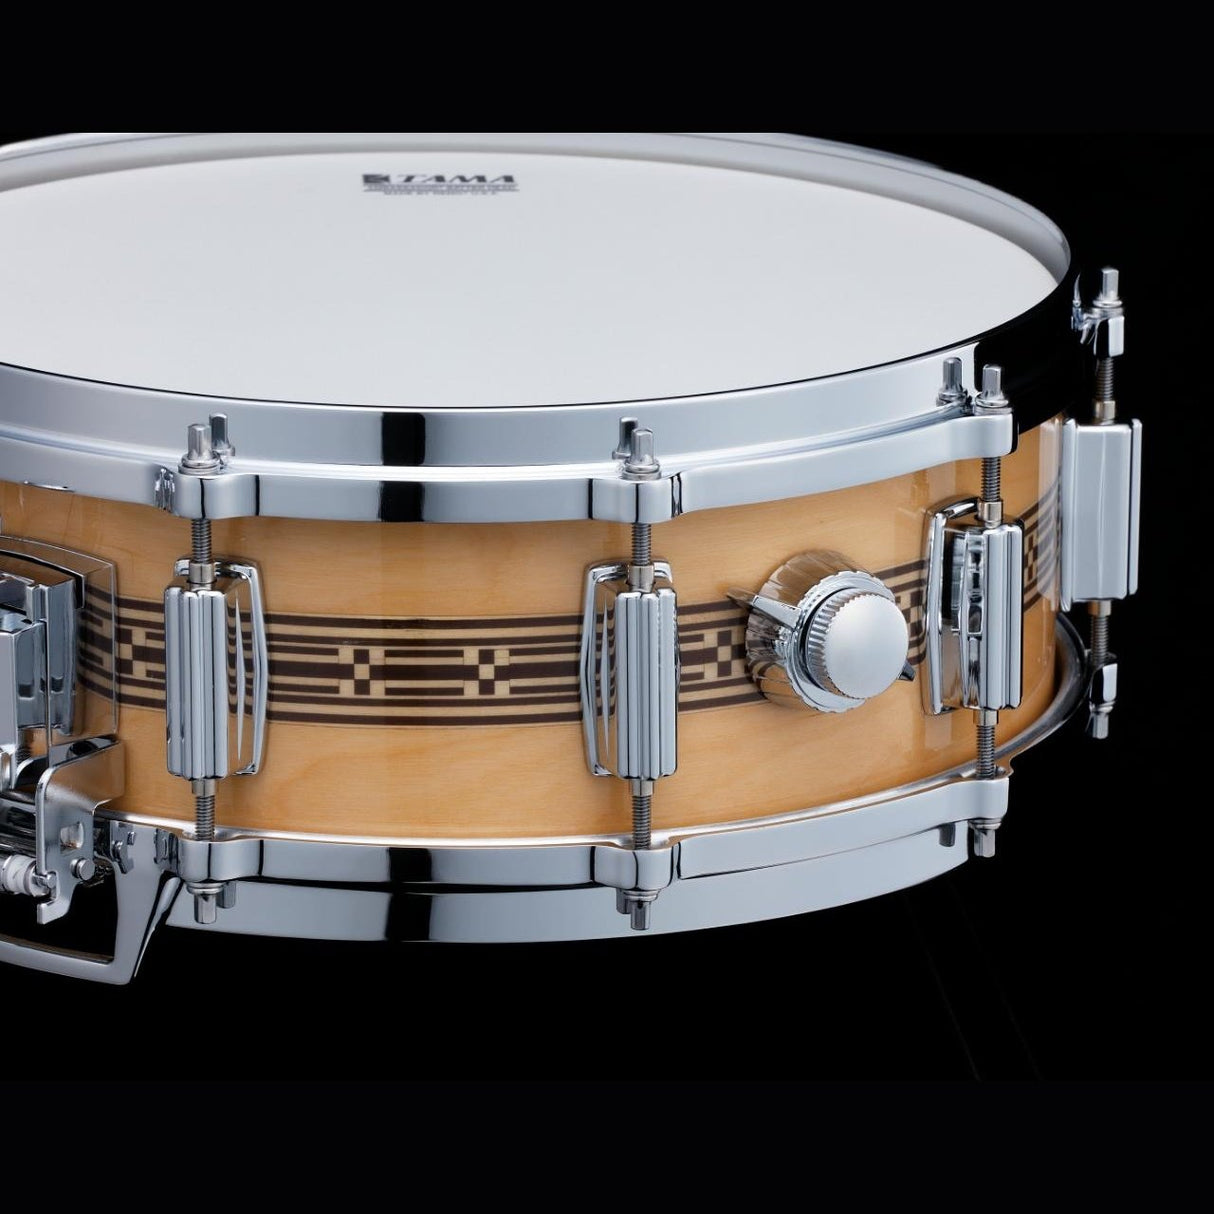 [EMBARGOED - ENABLE JANUARY 10] Tama 50th Limited Mastercraft Artwood Snare Drum 14x5 - Drum Center Of Portsmouth